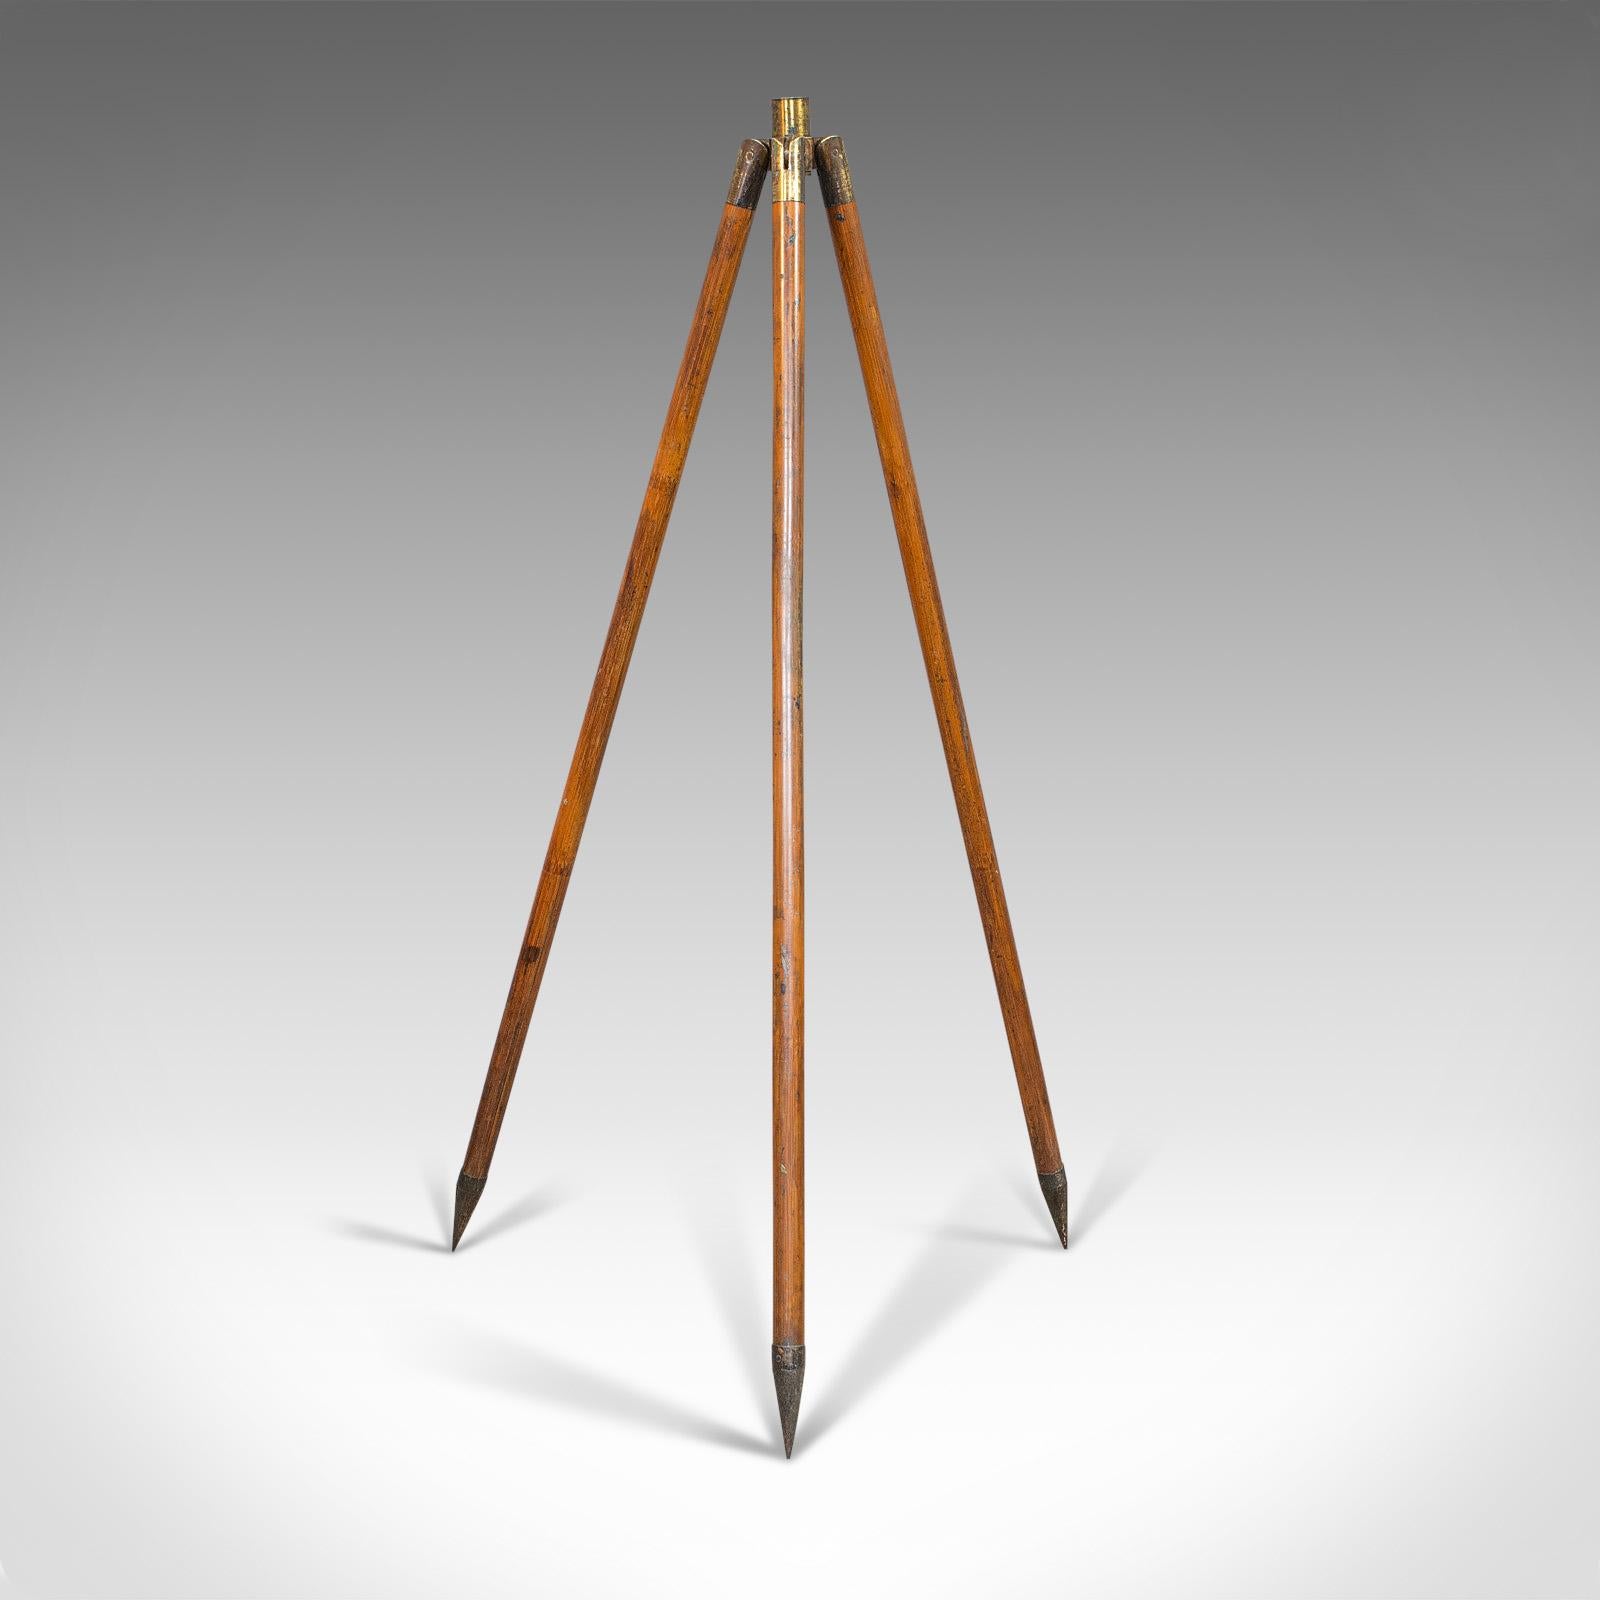 This is a compact vintage tripod. An English, bamboo and brass telescope stand, dating to the mid-20th century, circa 1950.

Displays a desirable aged patina
Eye-catching bamboo with rich hues
Dressed with brass hinges and anchor point
Socket